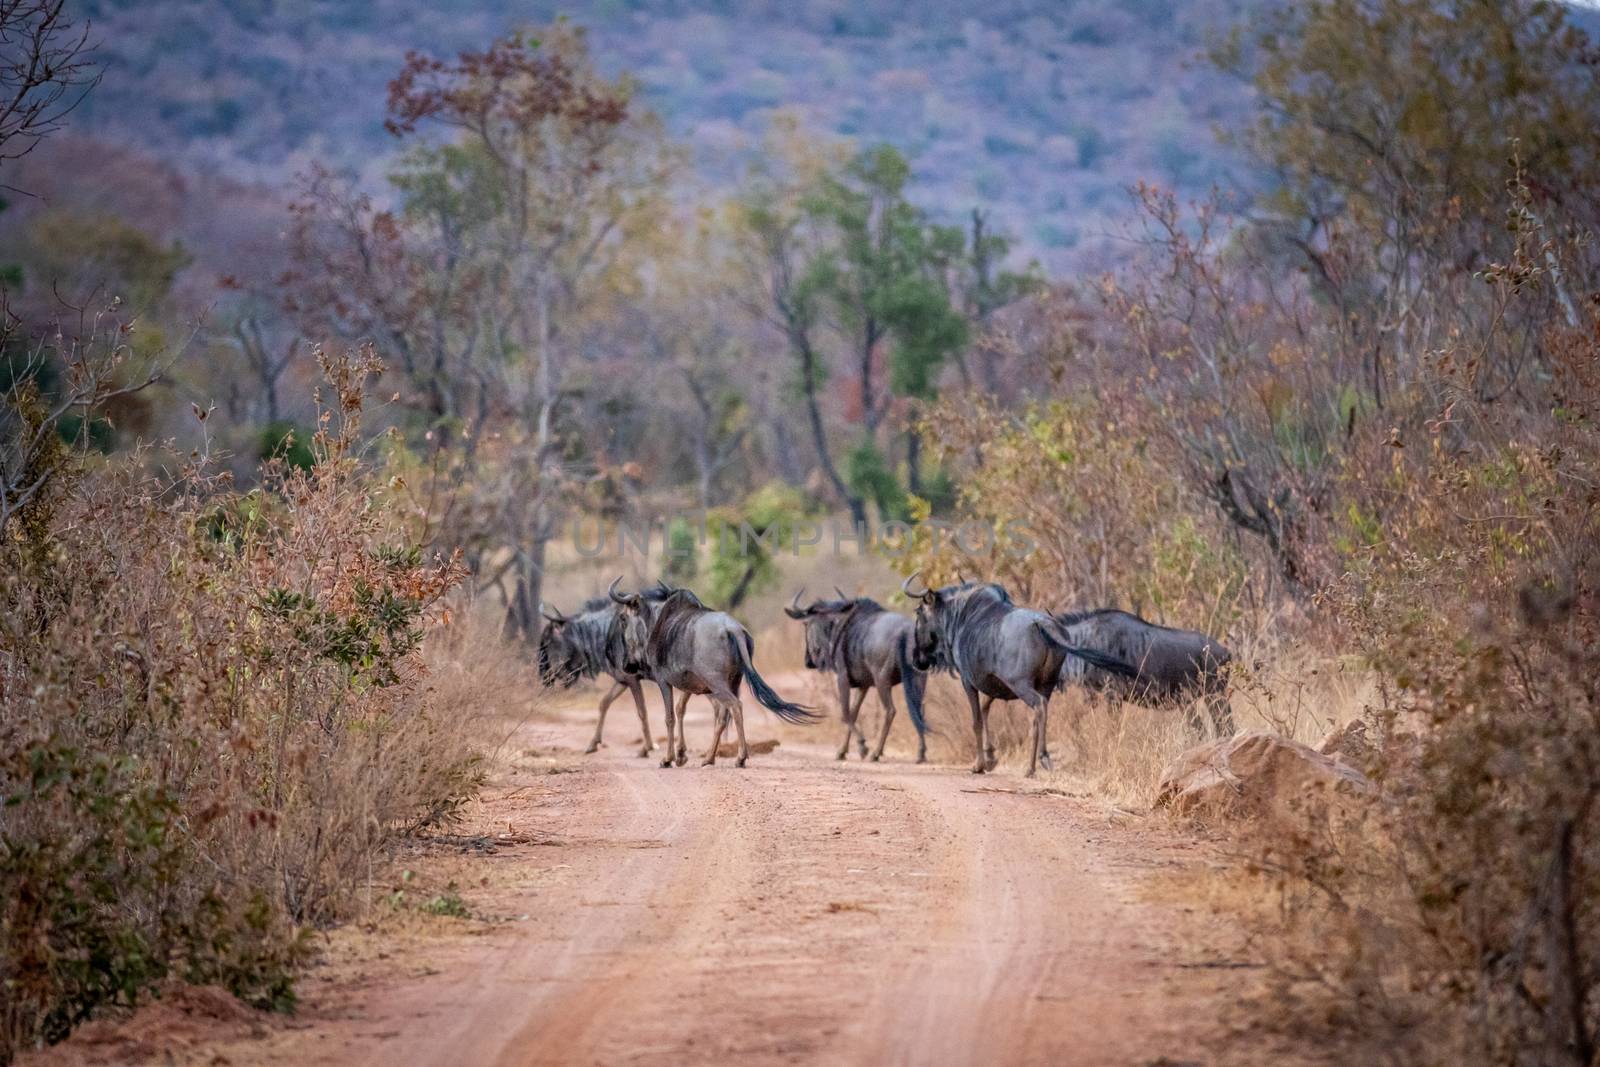 Blue wildebeest standing in the road. by Simoneemanphotography